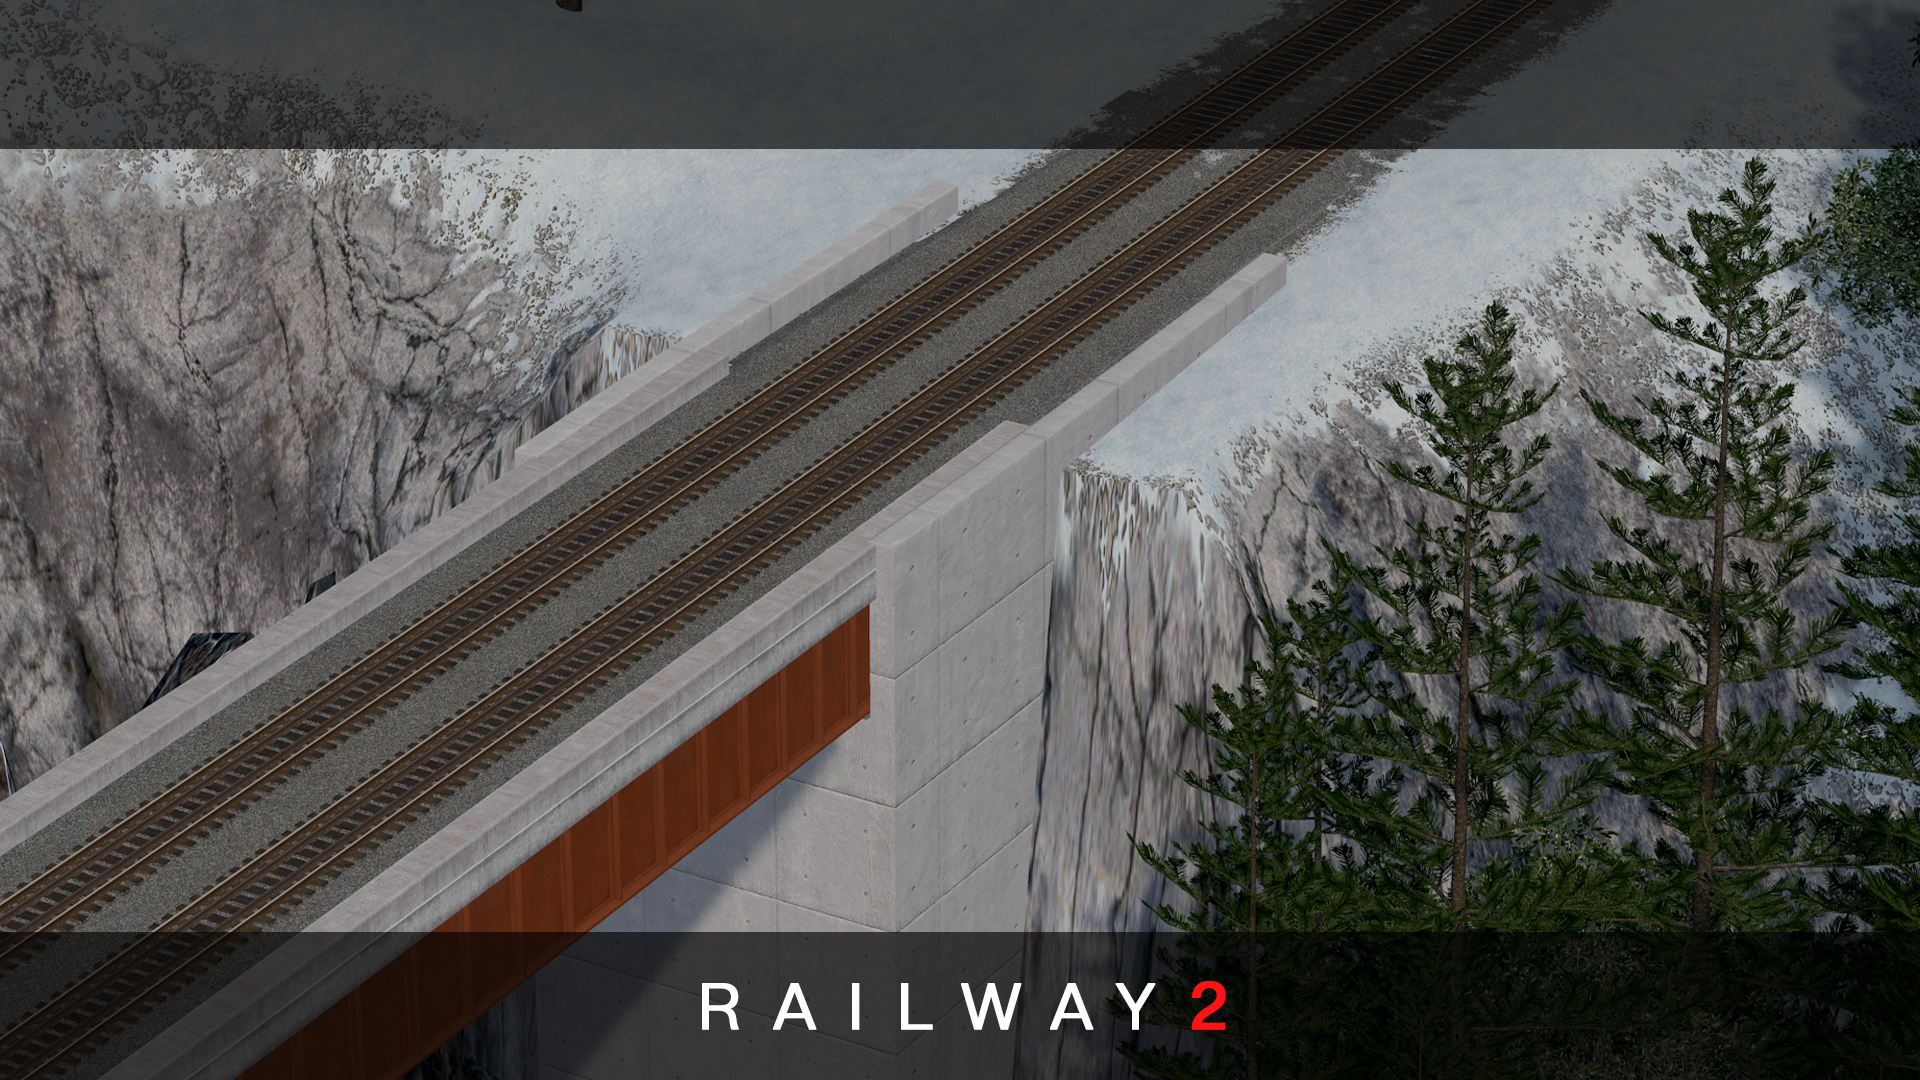 Cities: Skylines List of Railway 2 + Features + Modding Tutorial Information - 4.1 Networks: Core Features - 72233B8